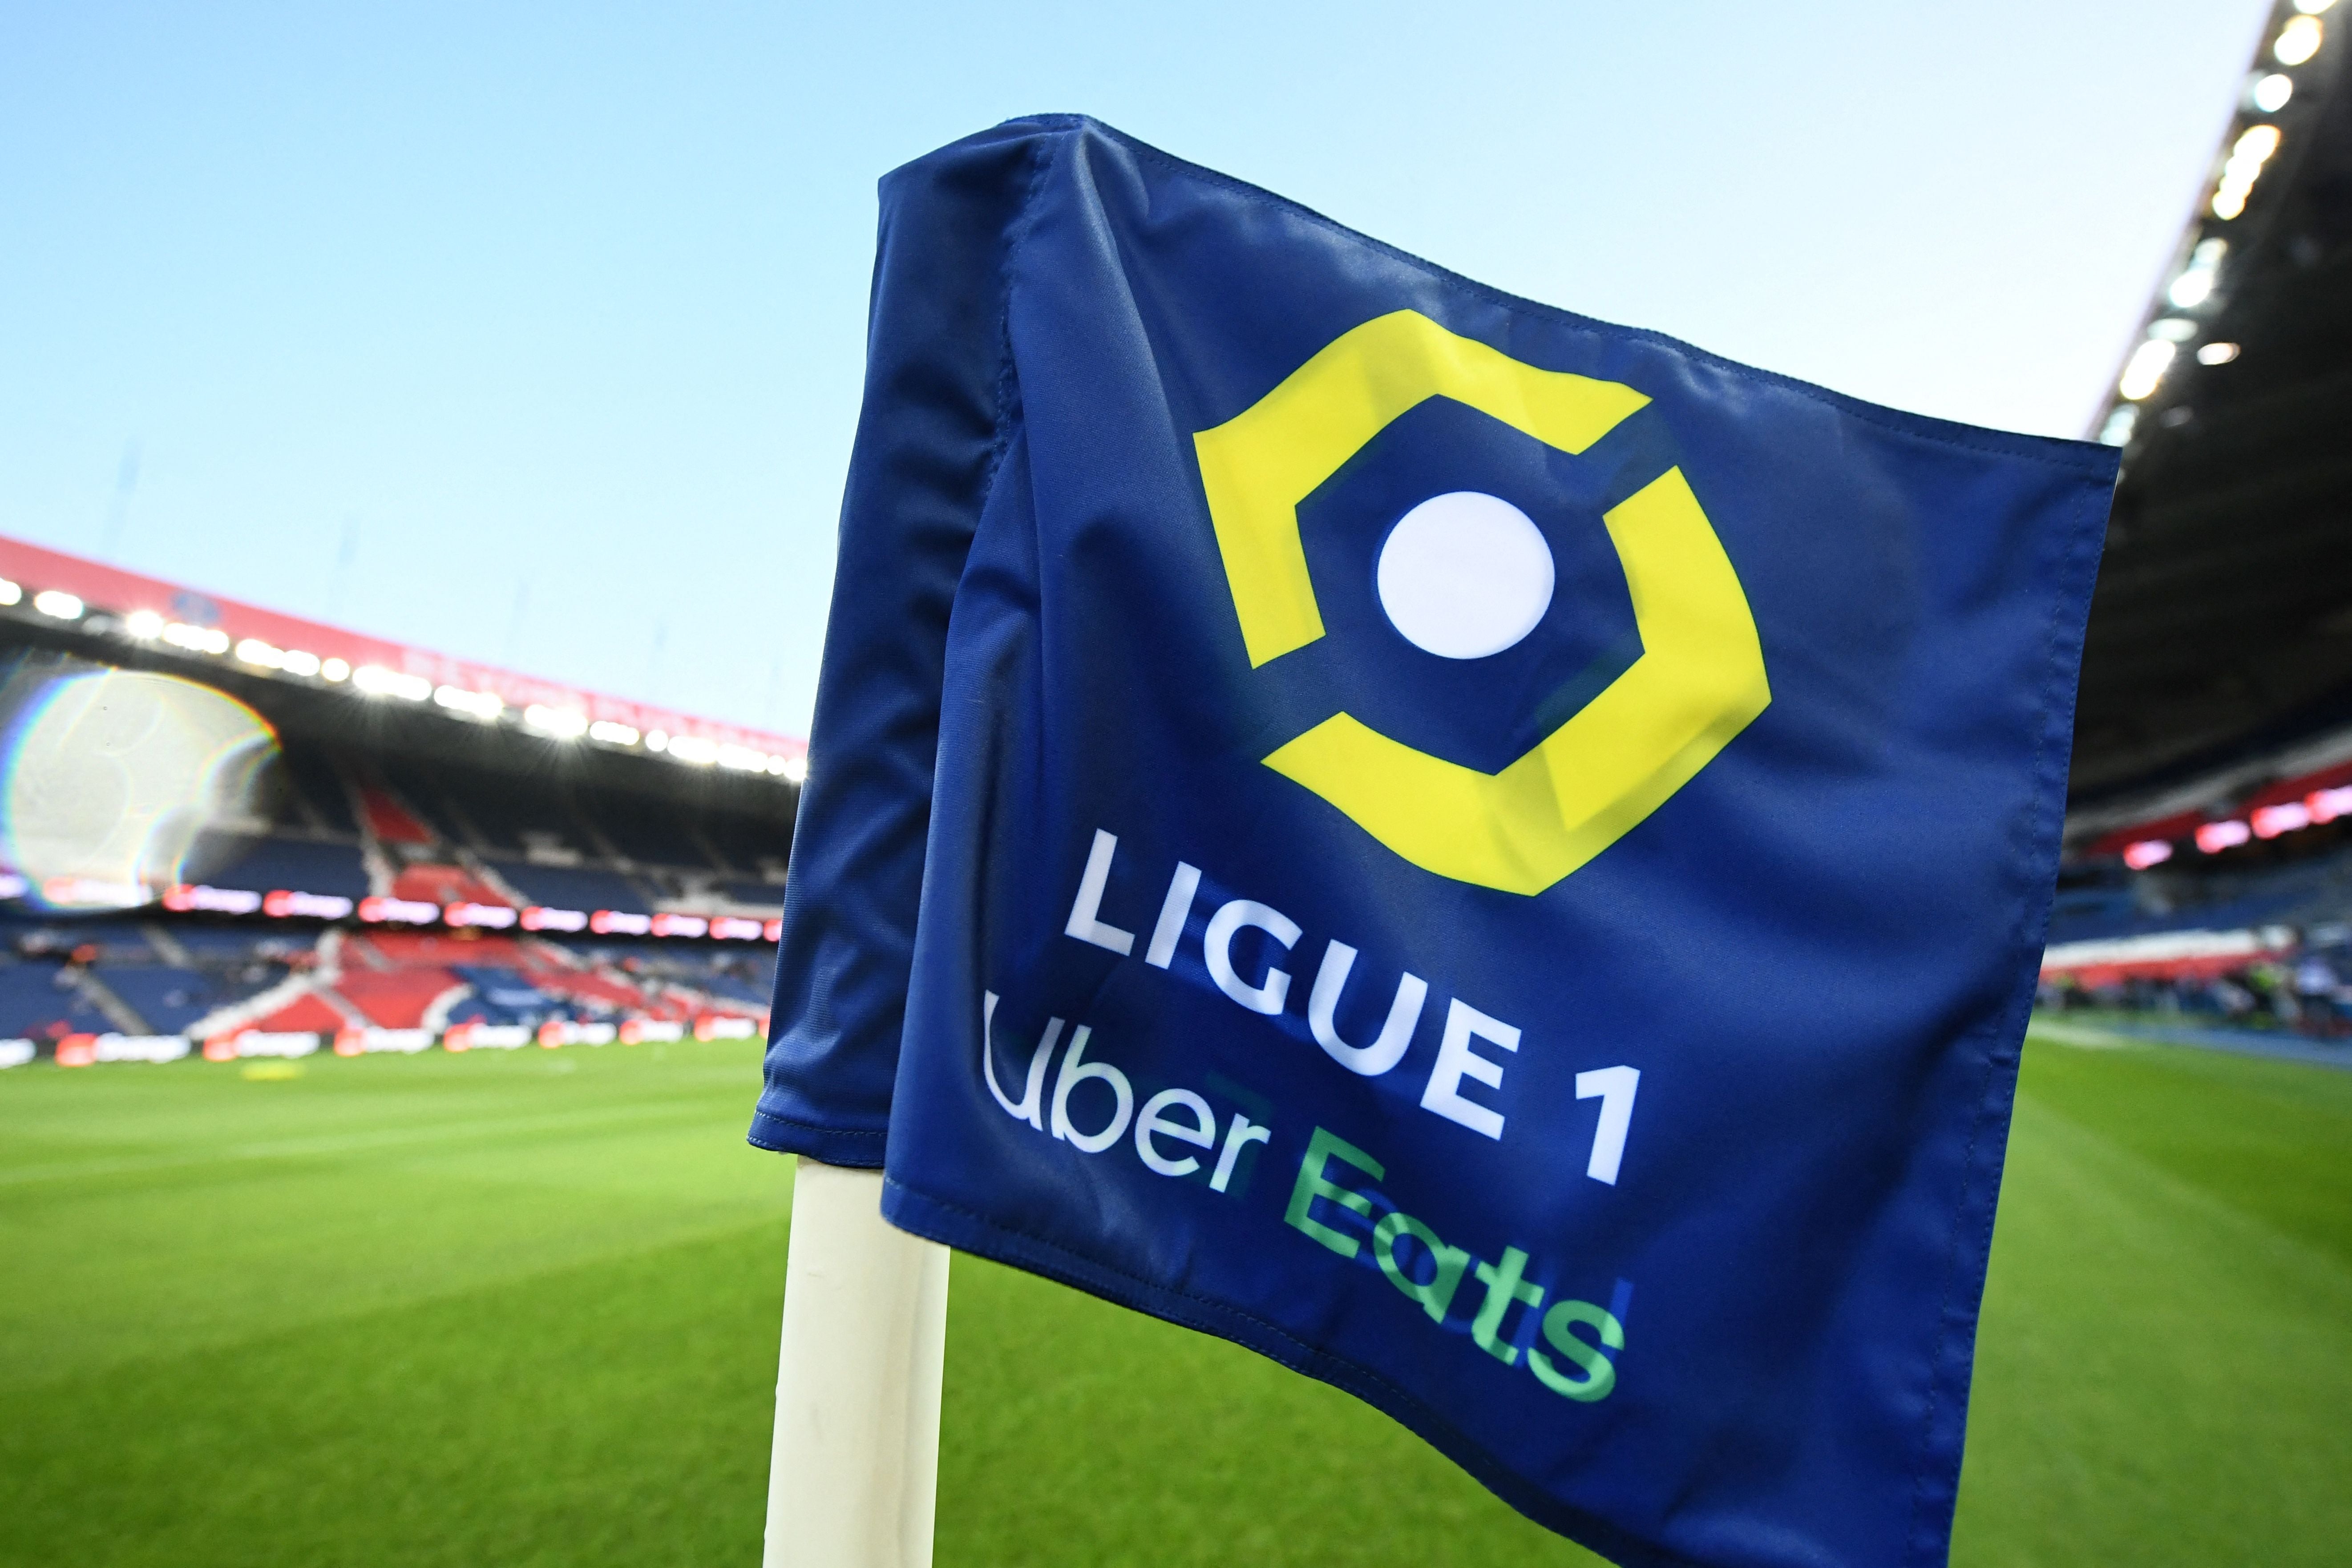 Ligue 1 could become the latest prominent sports league to receive significant private equity investment